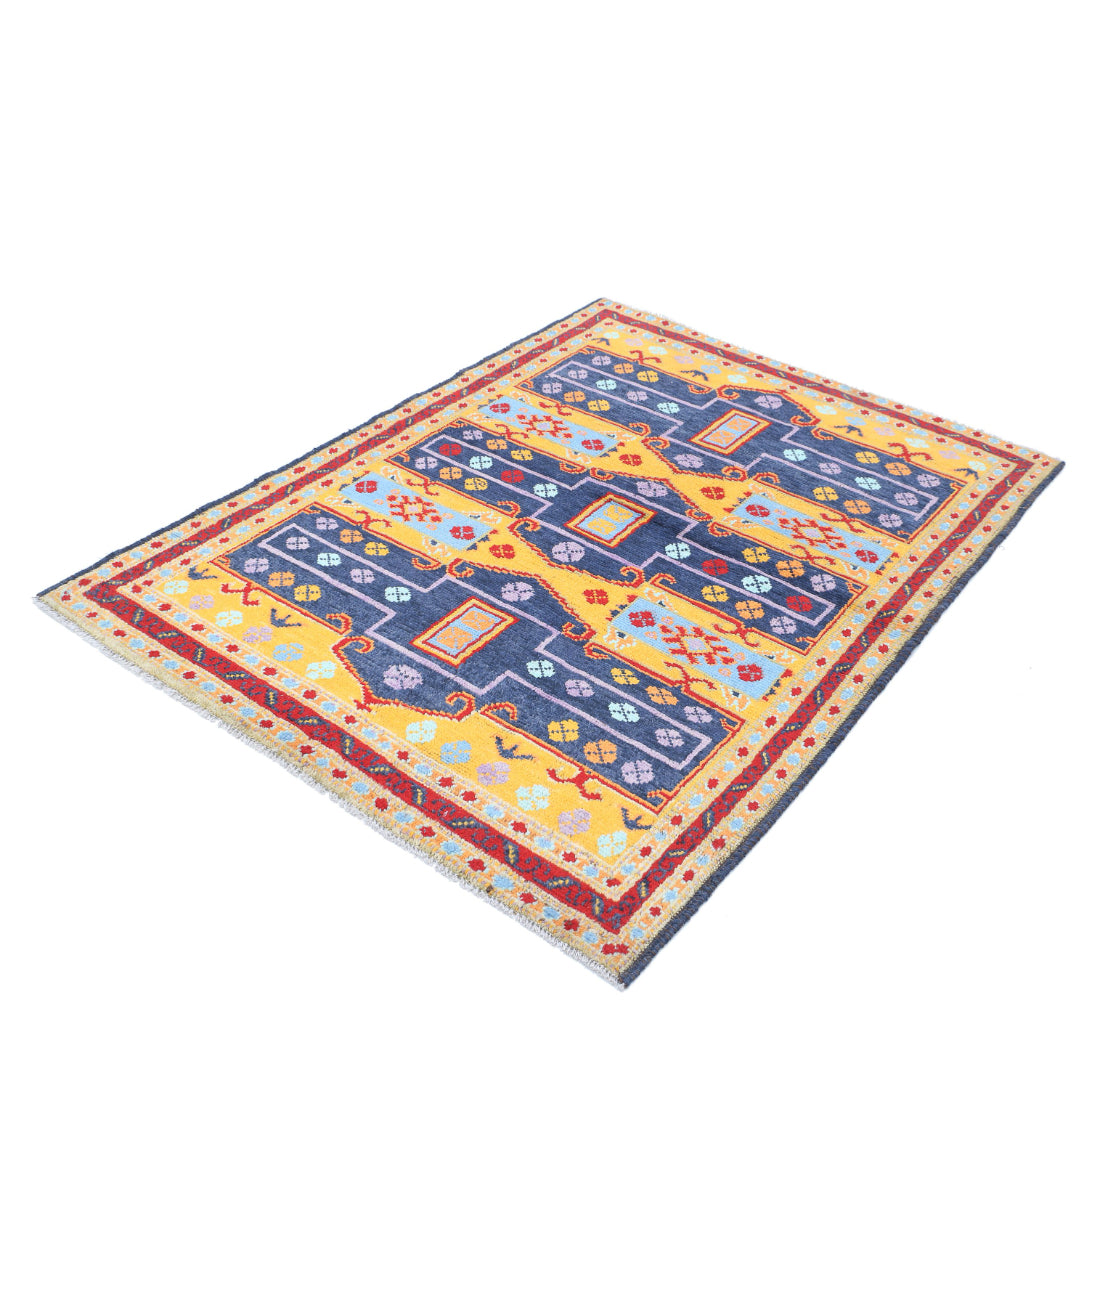 Revival 4'4'' X 5'10'' Hand-Knotted Wool Rug 4'4'' x 5'10'' (130 X 175) / Blue / Red